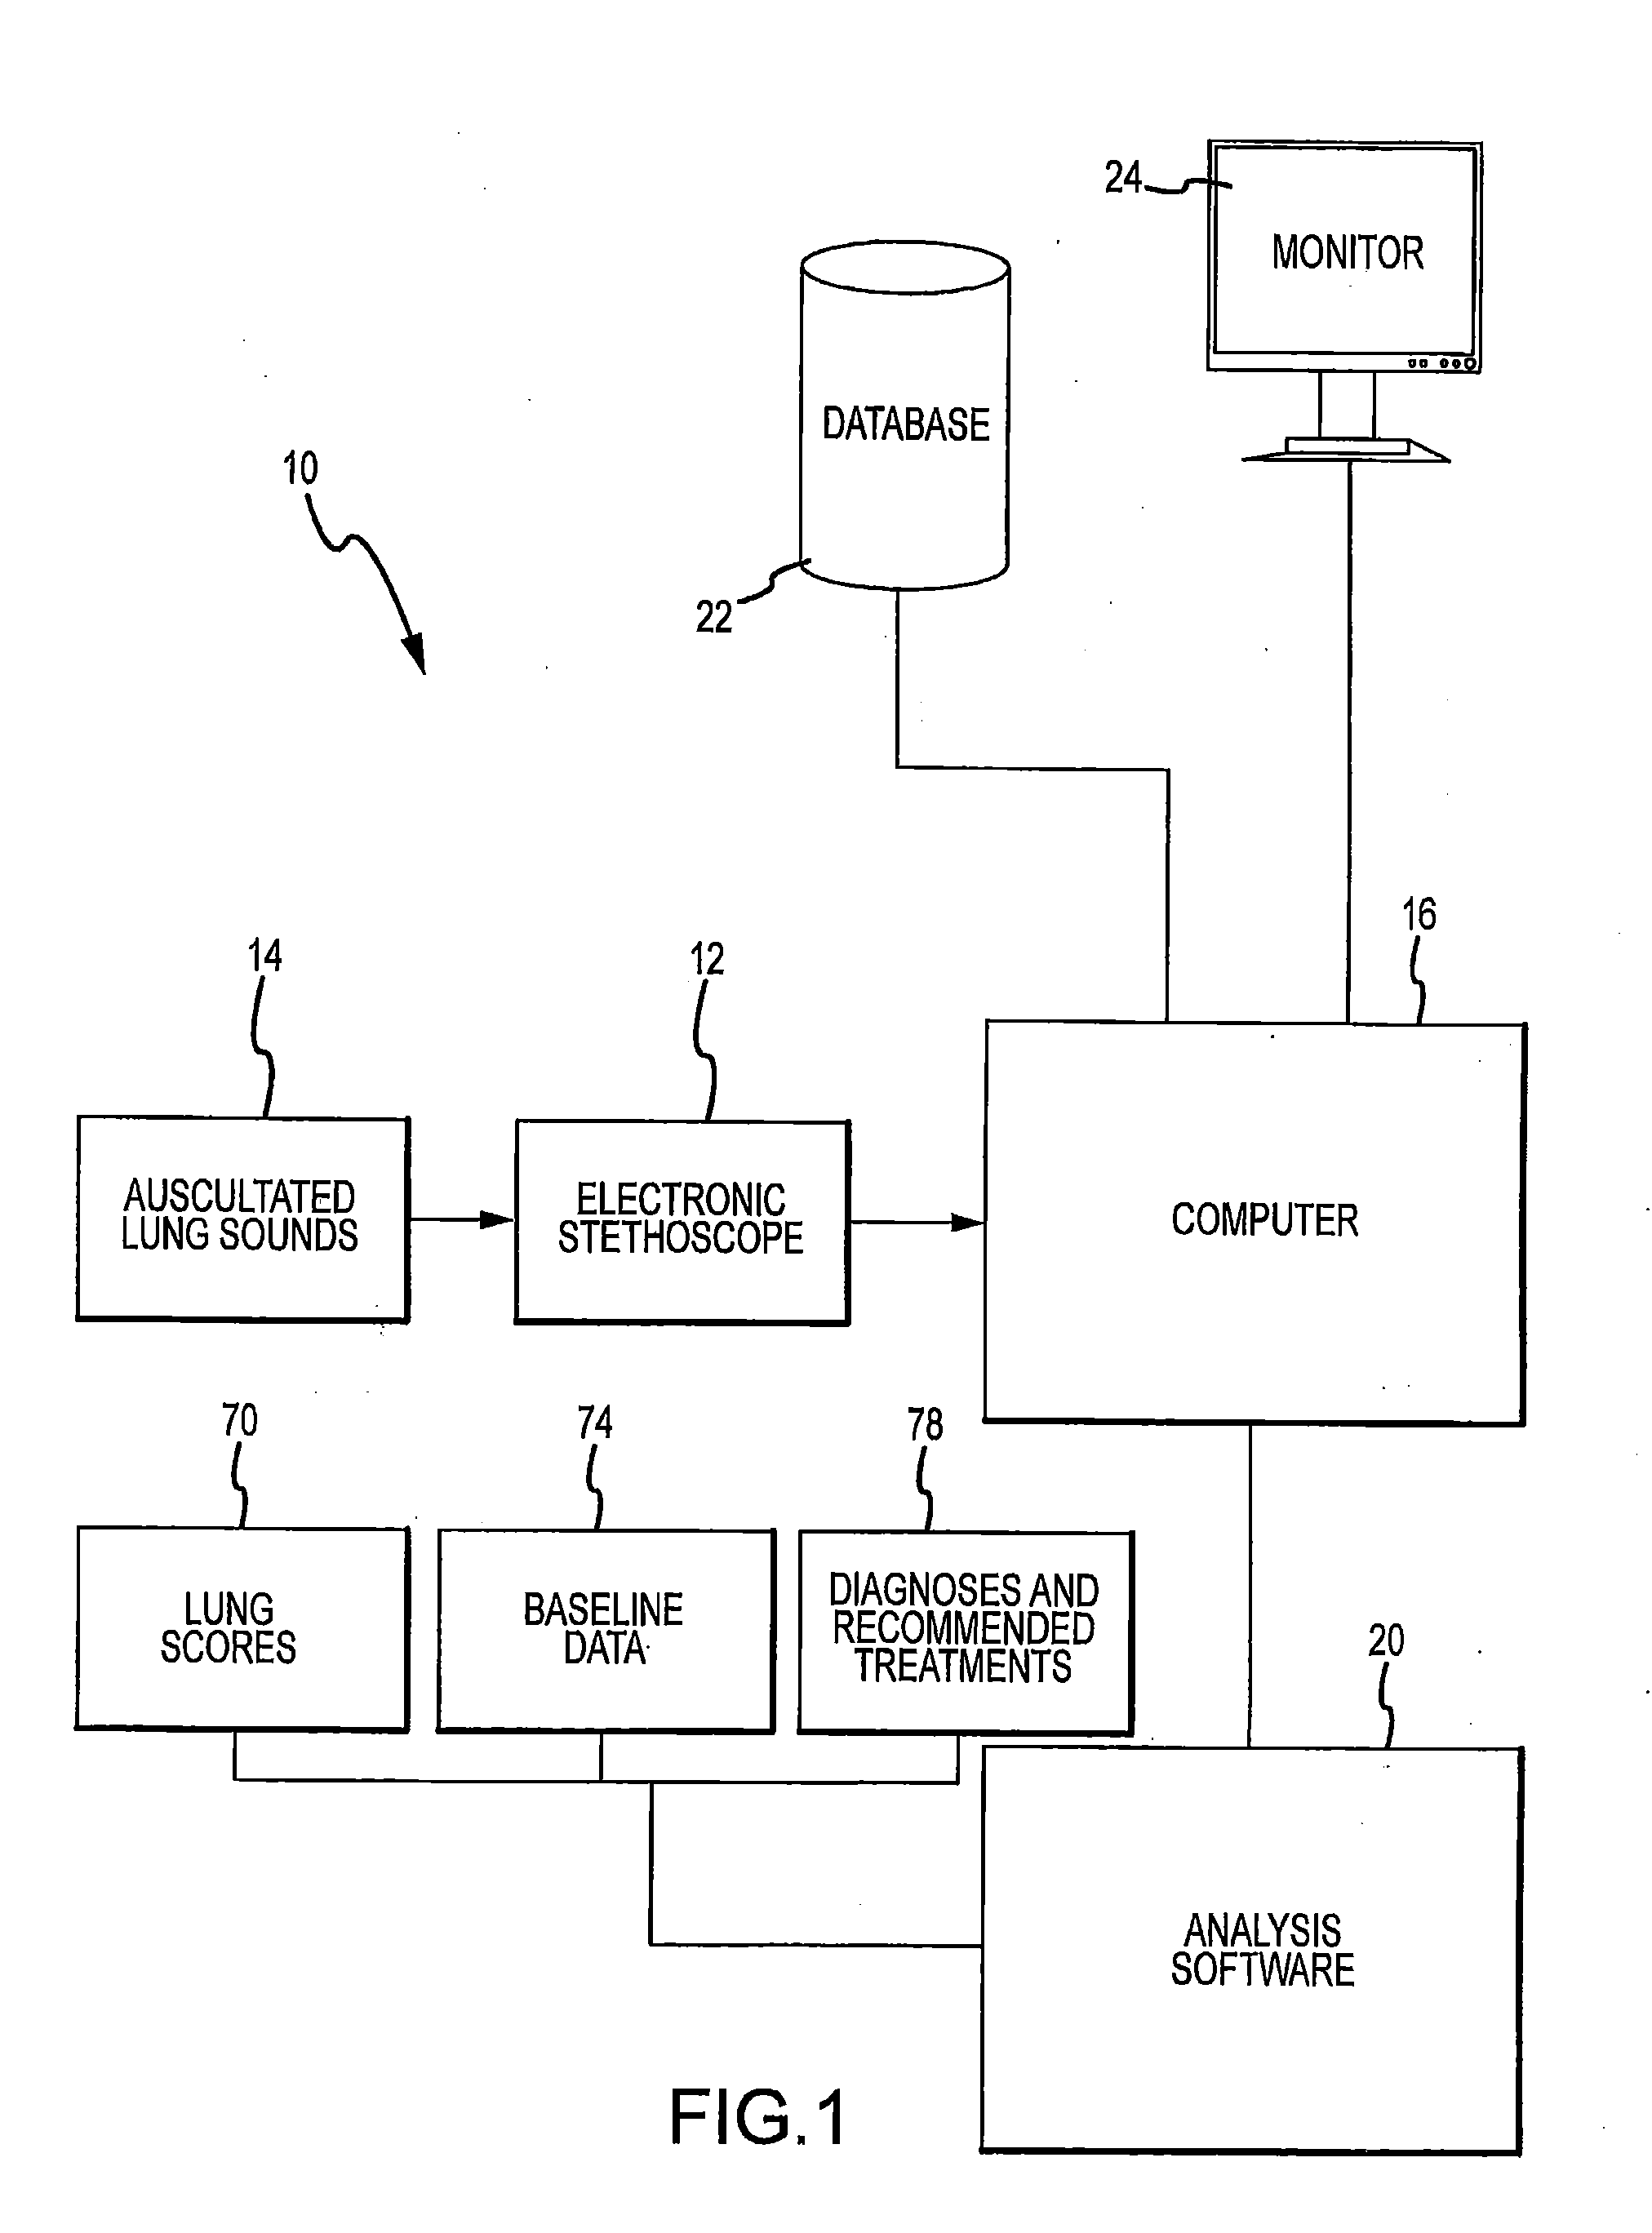 System and method for diagnosis of bovine diseases using auscultation analysis